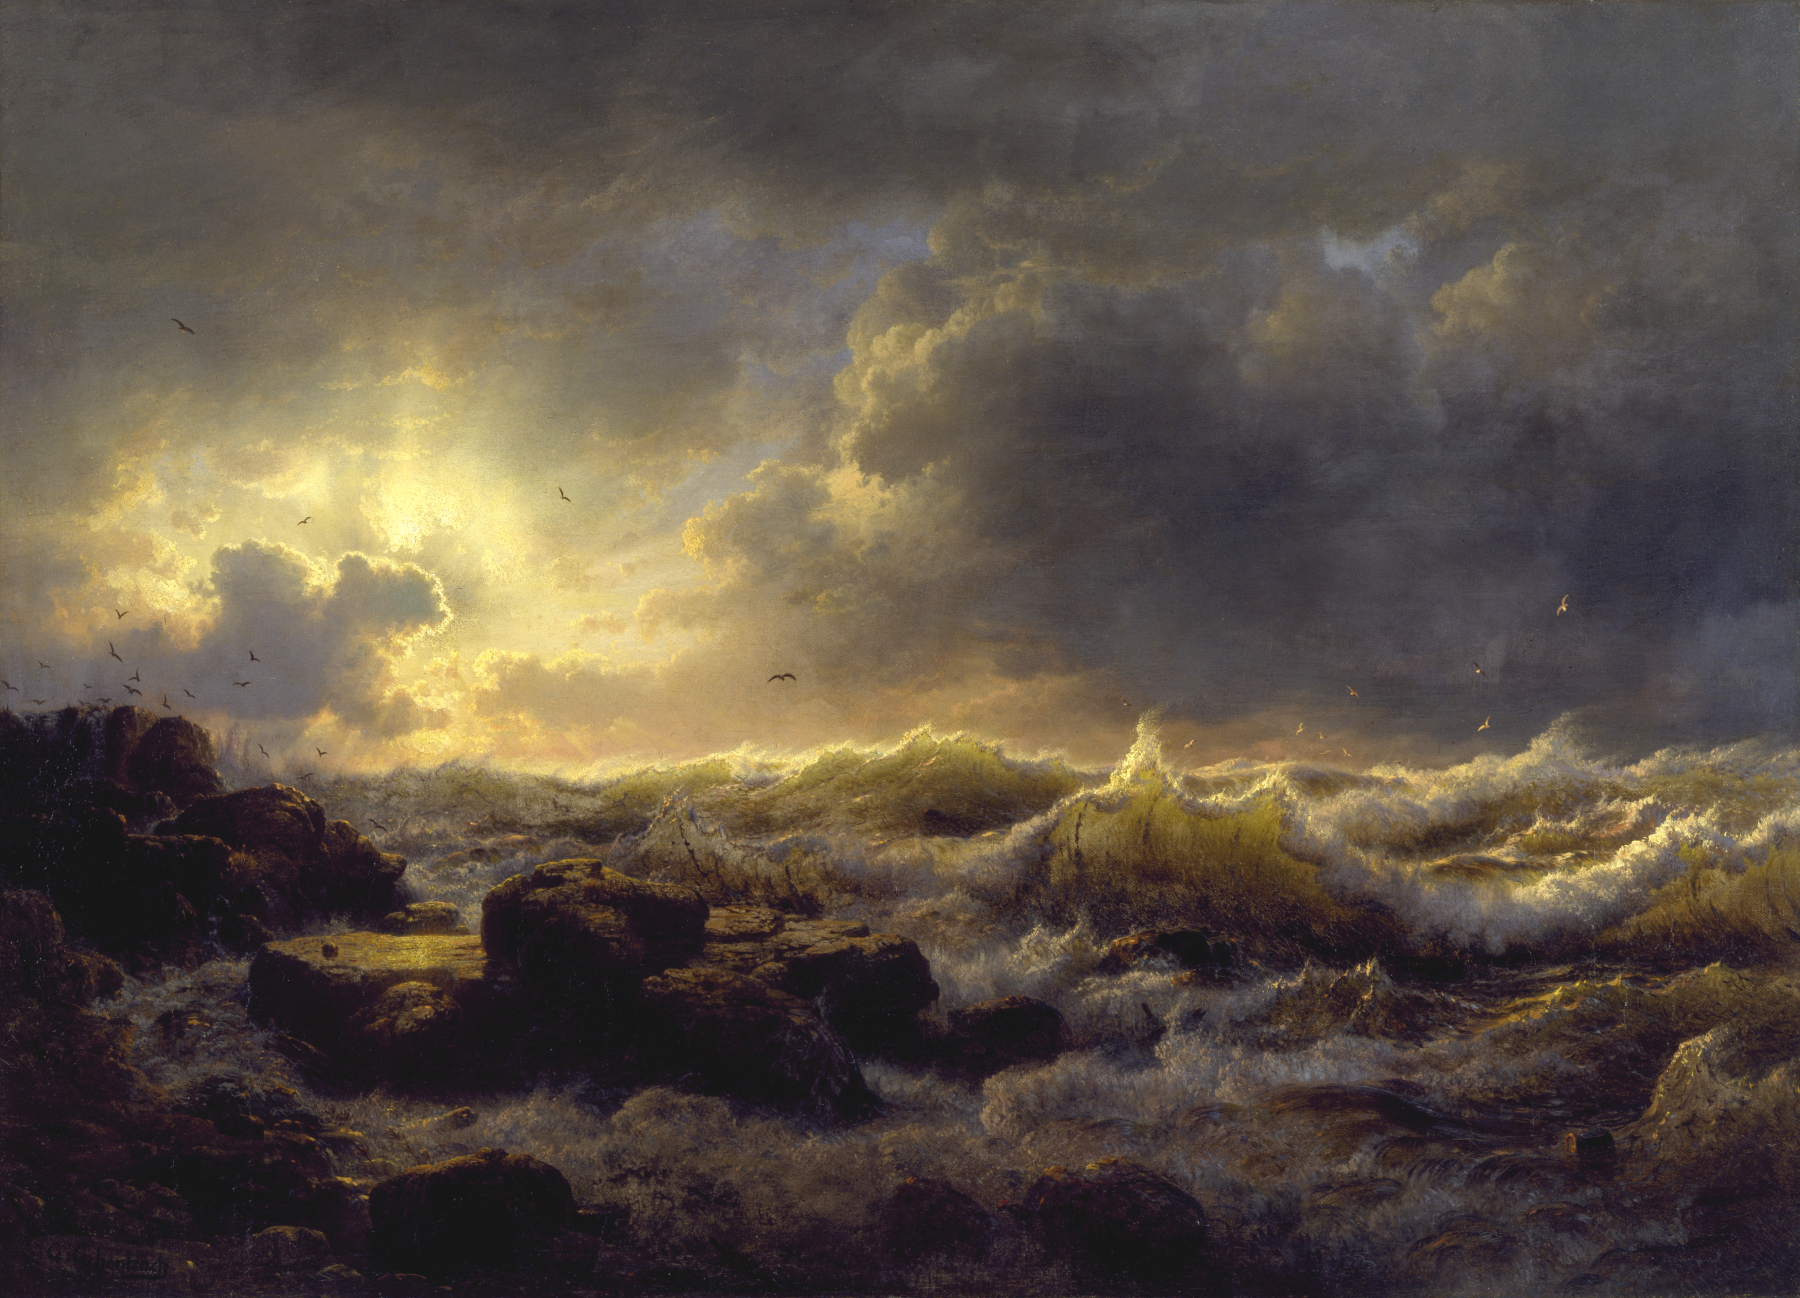 A landscape view of a stormy ocean with the sun covered by clouds